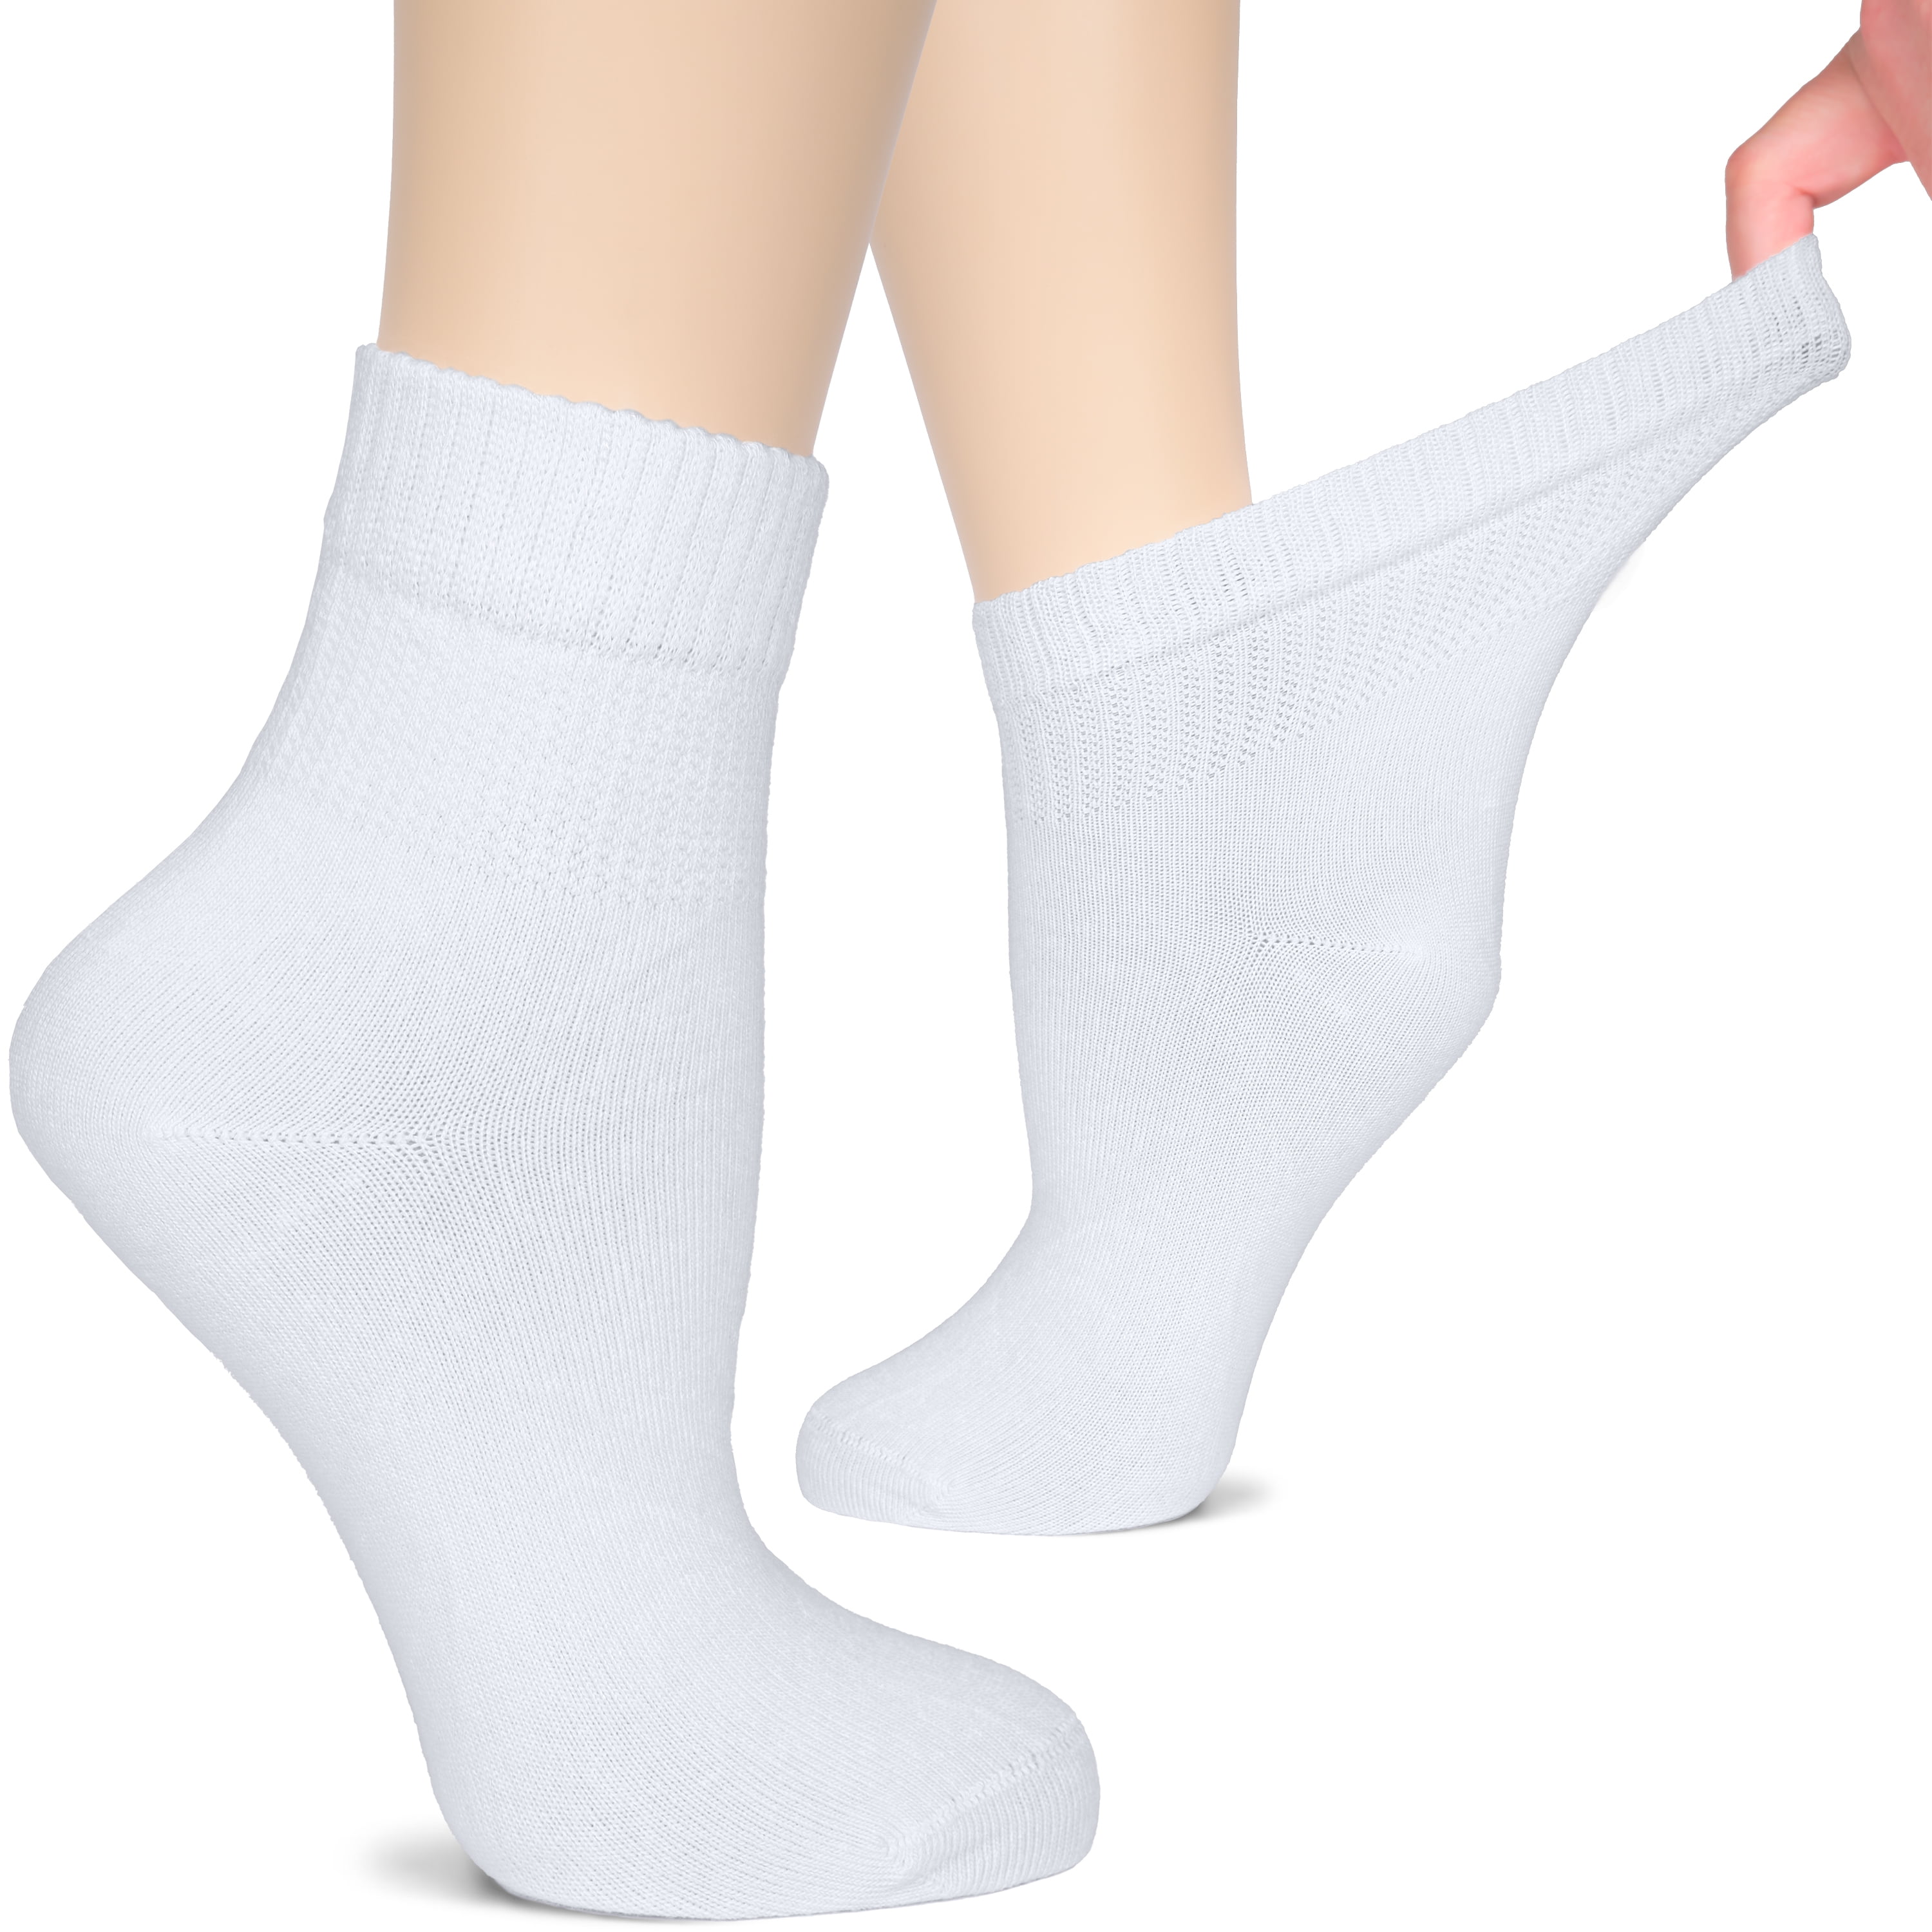 Women Half Toe Socks,10 Pairs Toe Topper Cover Non-Slip with Grip Invisible  Liner Backless Mule Sock